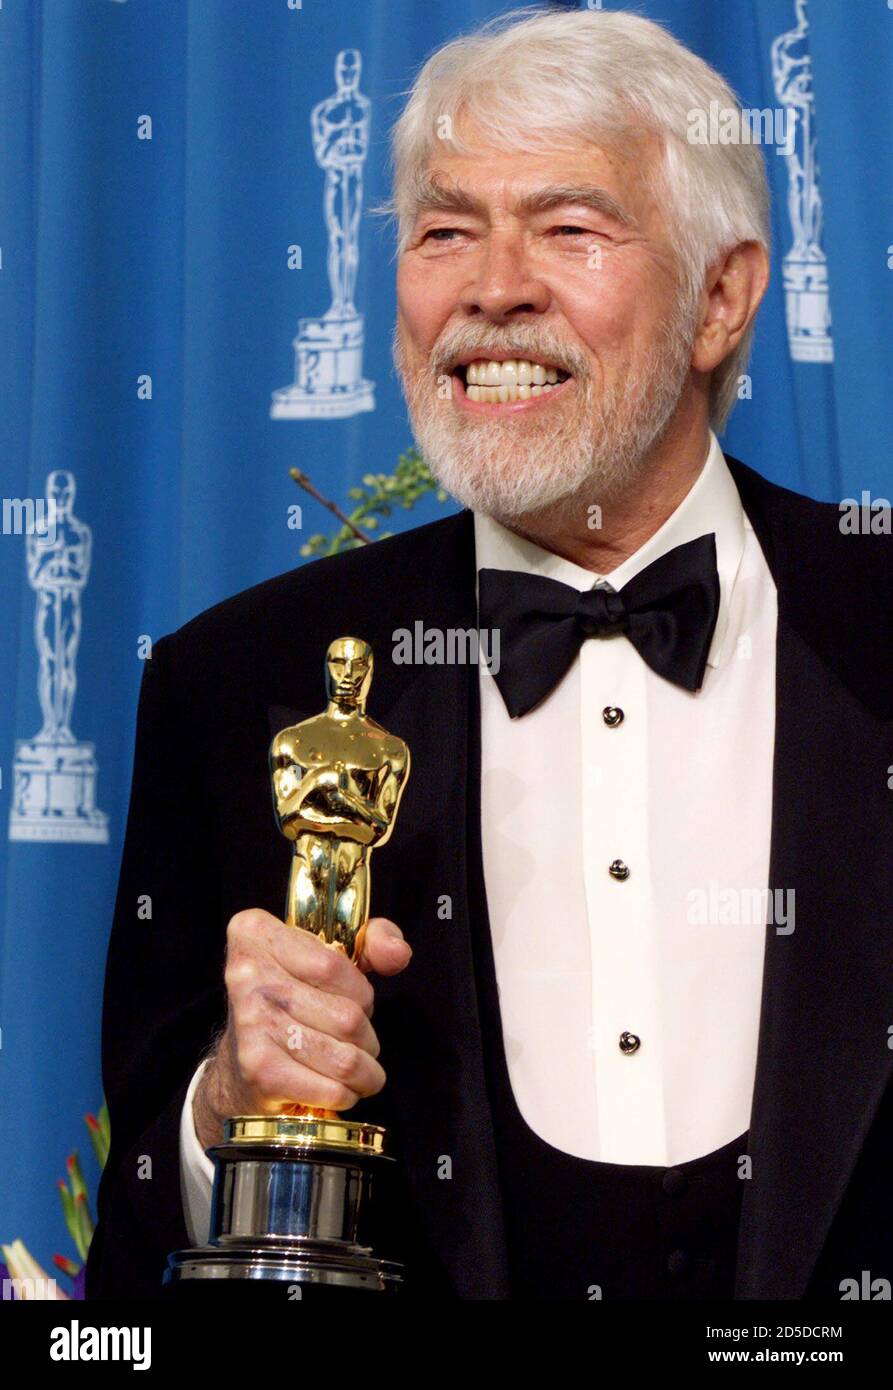 Actor James Coburn Holds His Oscar Statue After Winning Best Supporting Actor At The 71st Annual Academy Awards At The Dorothy Chandler Pavilion In Los Angeles March 21 Coburn Won The Award